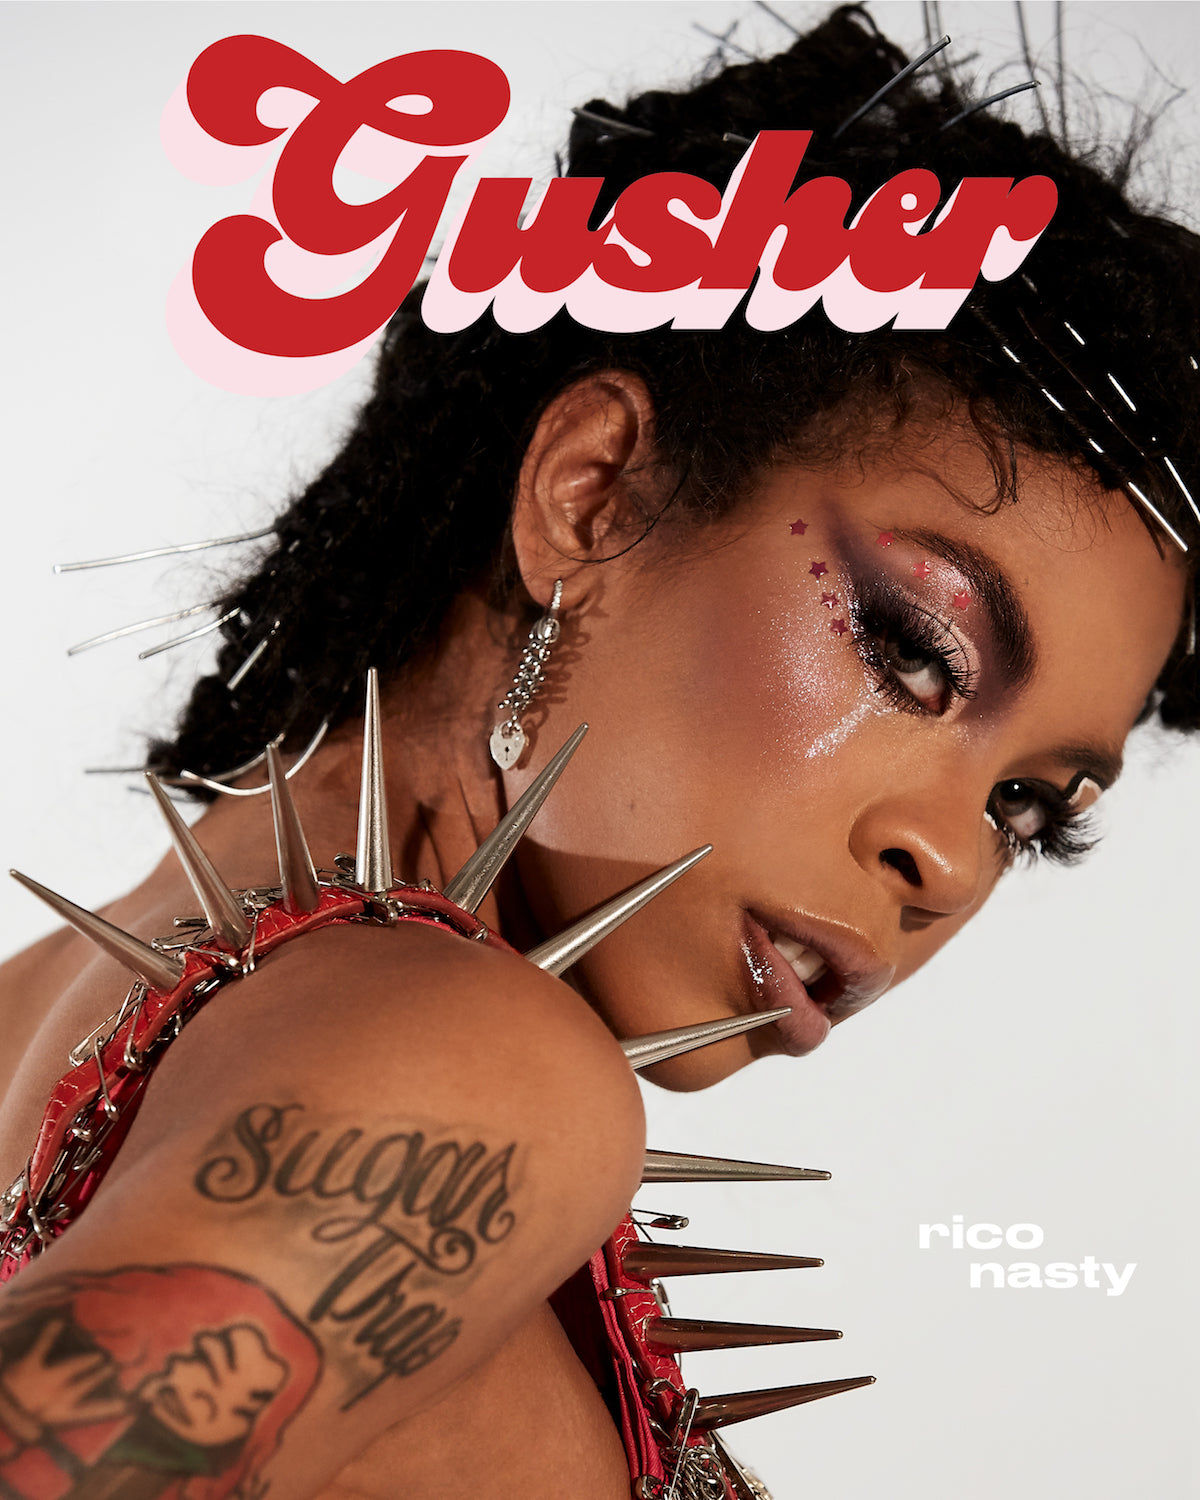 Gusher: Issue #4 (30% discount) cover